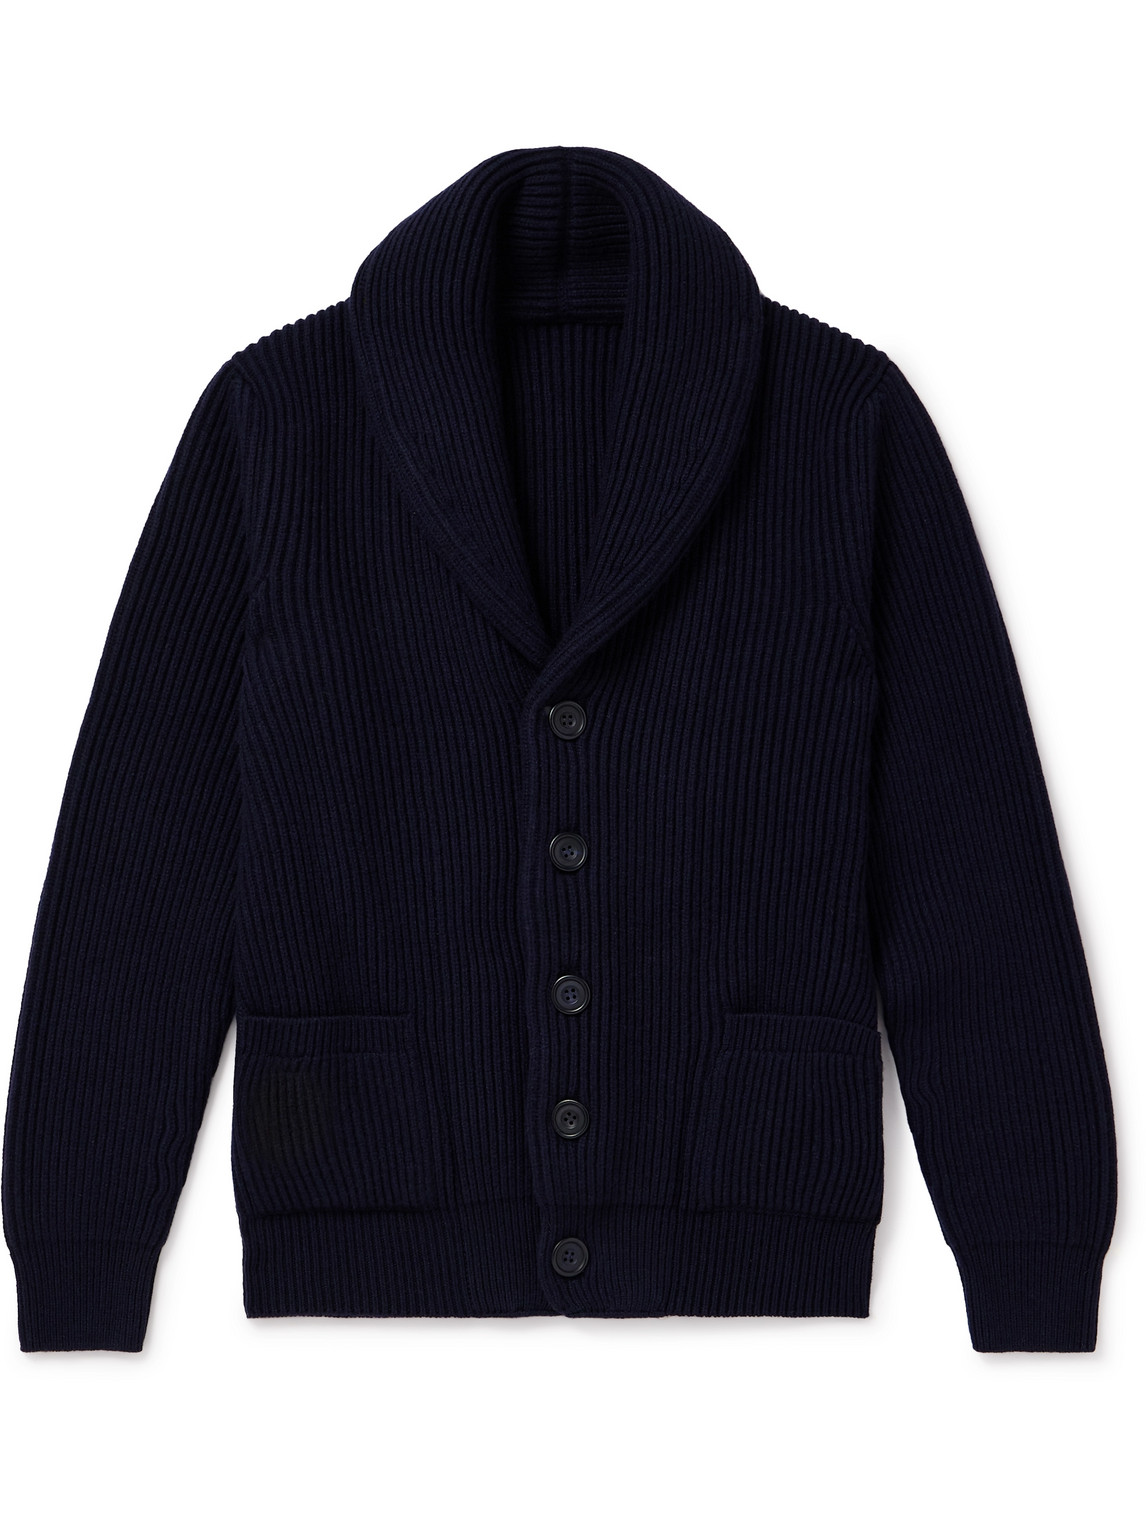 Anderson & Sheppard - Shawl-Collar Ribbed Wool and Cashmere-Blend Cardigan - Men - Blue - XS von Anderson & Sheppard